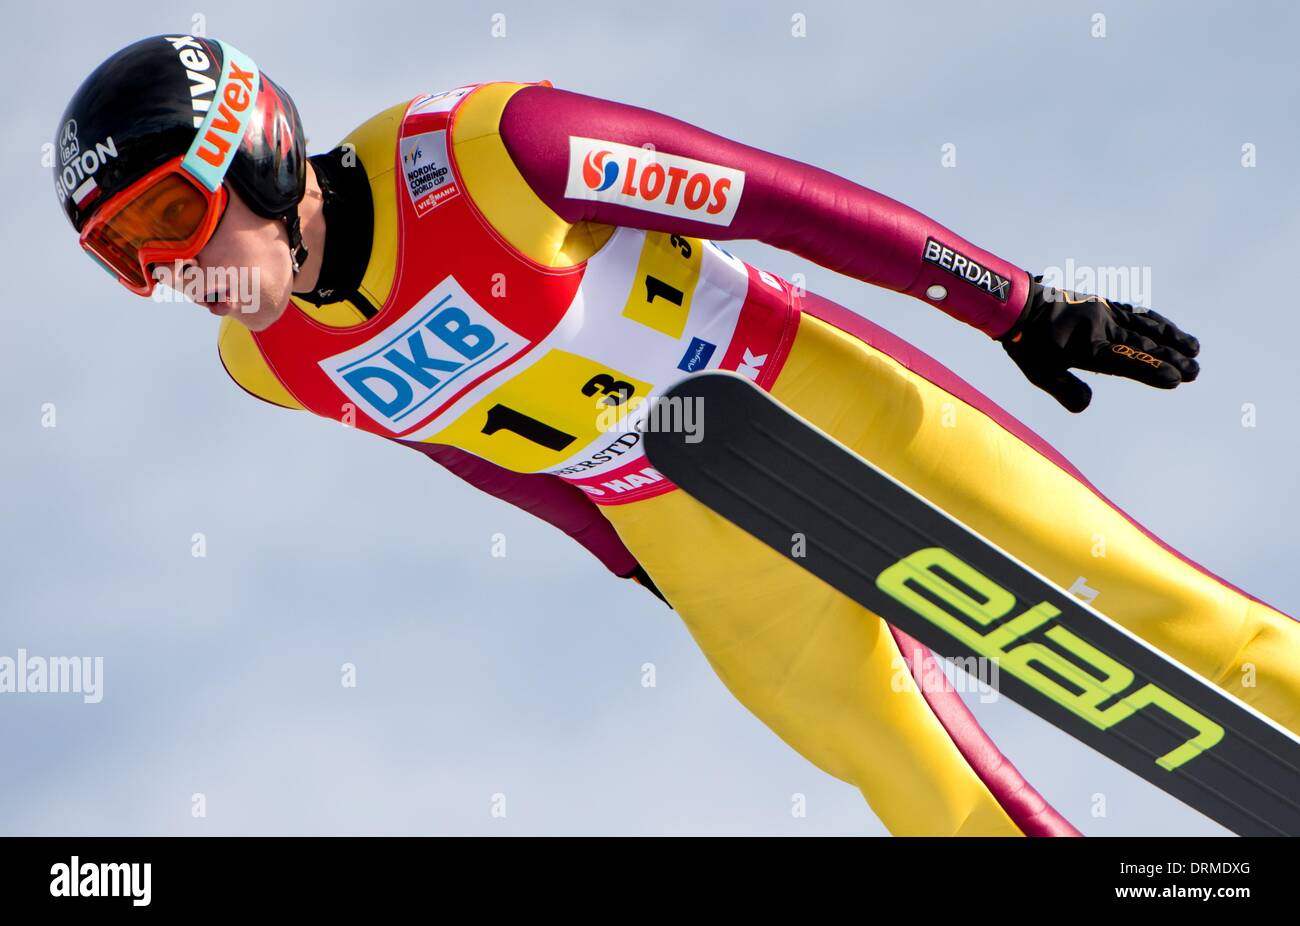 Ski jumper Andrzej Gasienica of Poland in action during a practice jump for the Nordic Combined World Cup  in Oberstdorf, Germany, 25 January 2014. Photo: Sven Hoppe/dpa Stock Photo